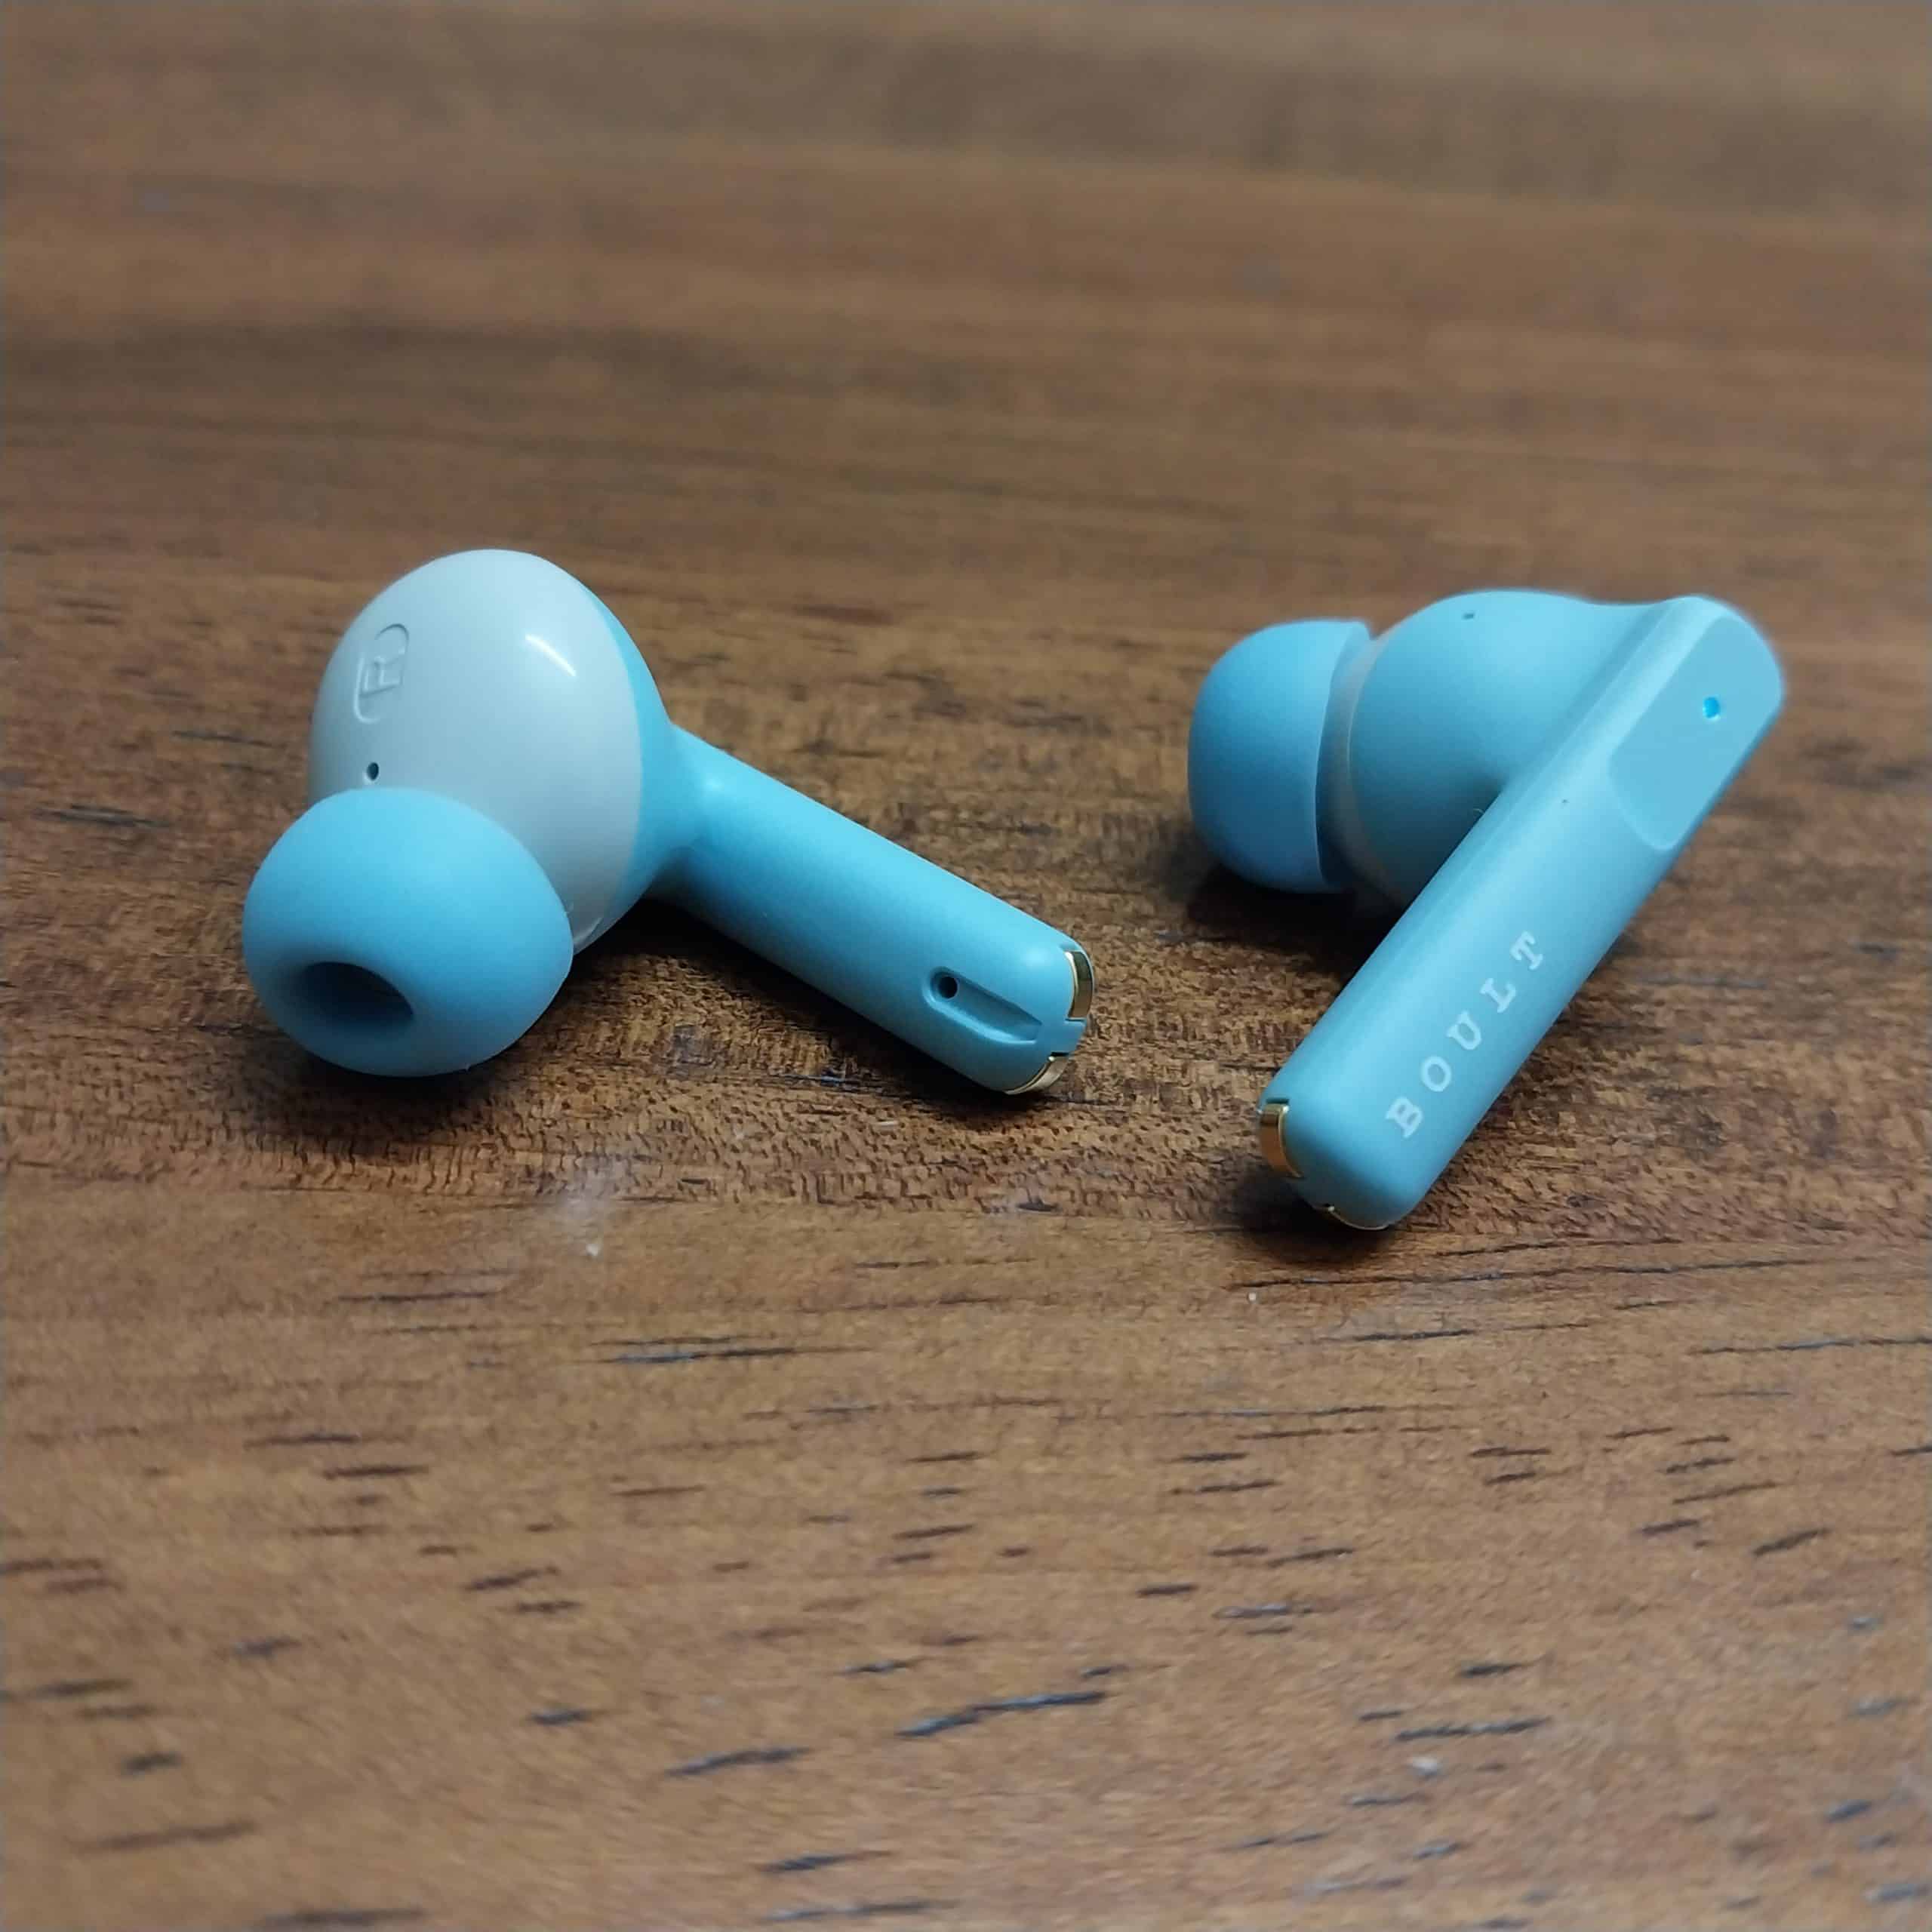 Boult Z60 Earbuds - Sound Quality and ENC